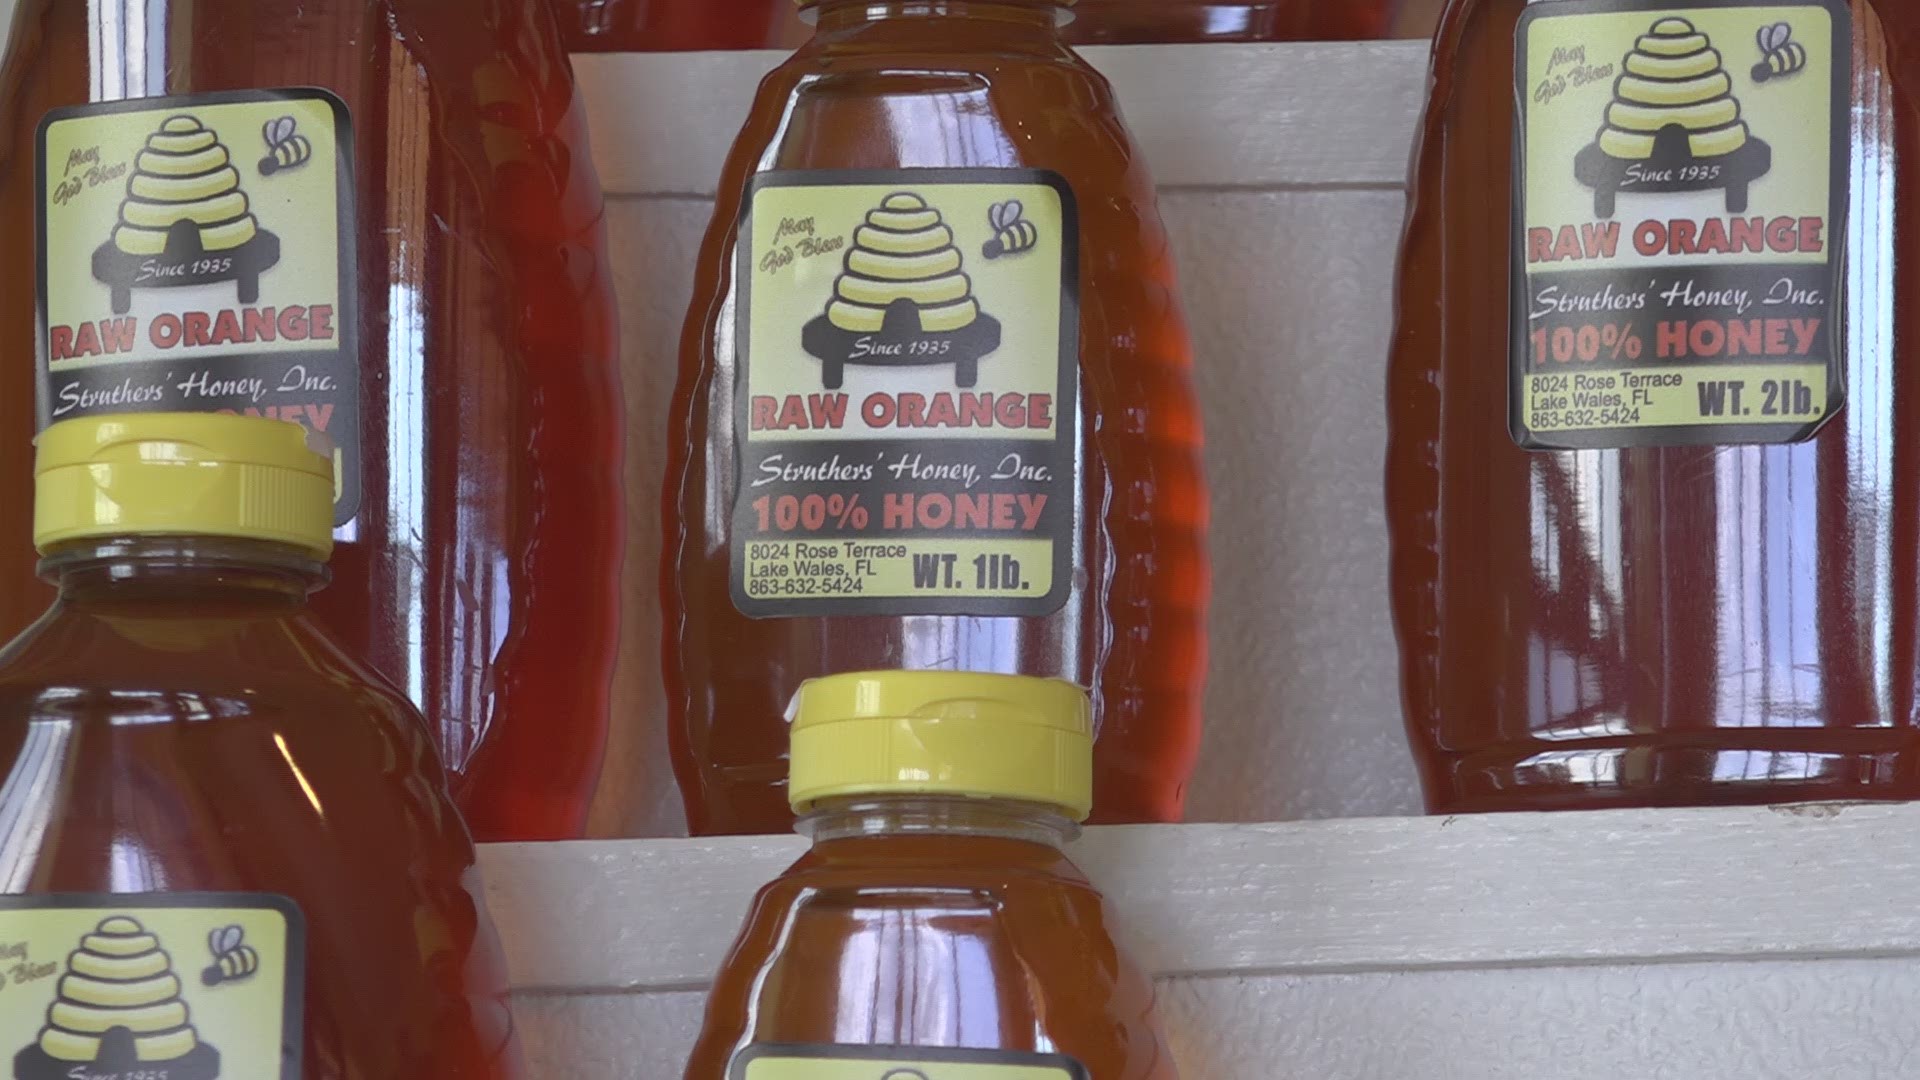 he old adage goes: It only takes one to ruin it for everybody else.

But in this case, the family behind the longstanding, beloved Struthers’ Honey shop says they’re not about to change how they’ve done business for generations just because of a few bad customers.

Earlier in July, on two separate occasions, three individuals walked out with hundreds of dollars worth of honey without fully paying for it.